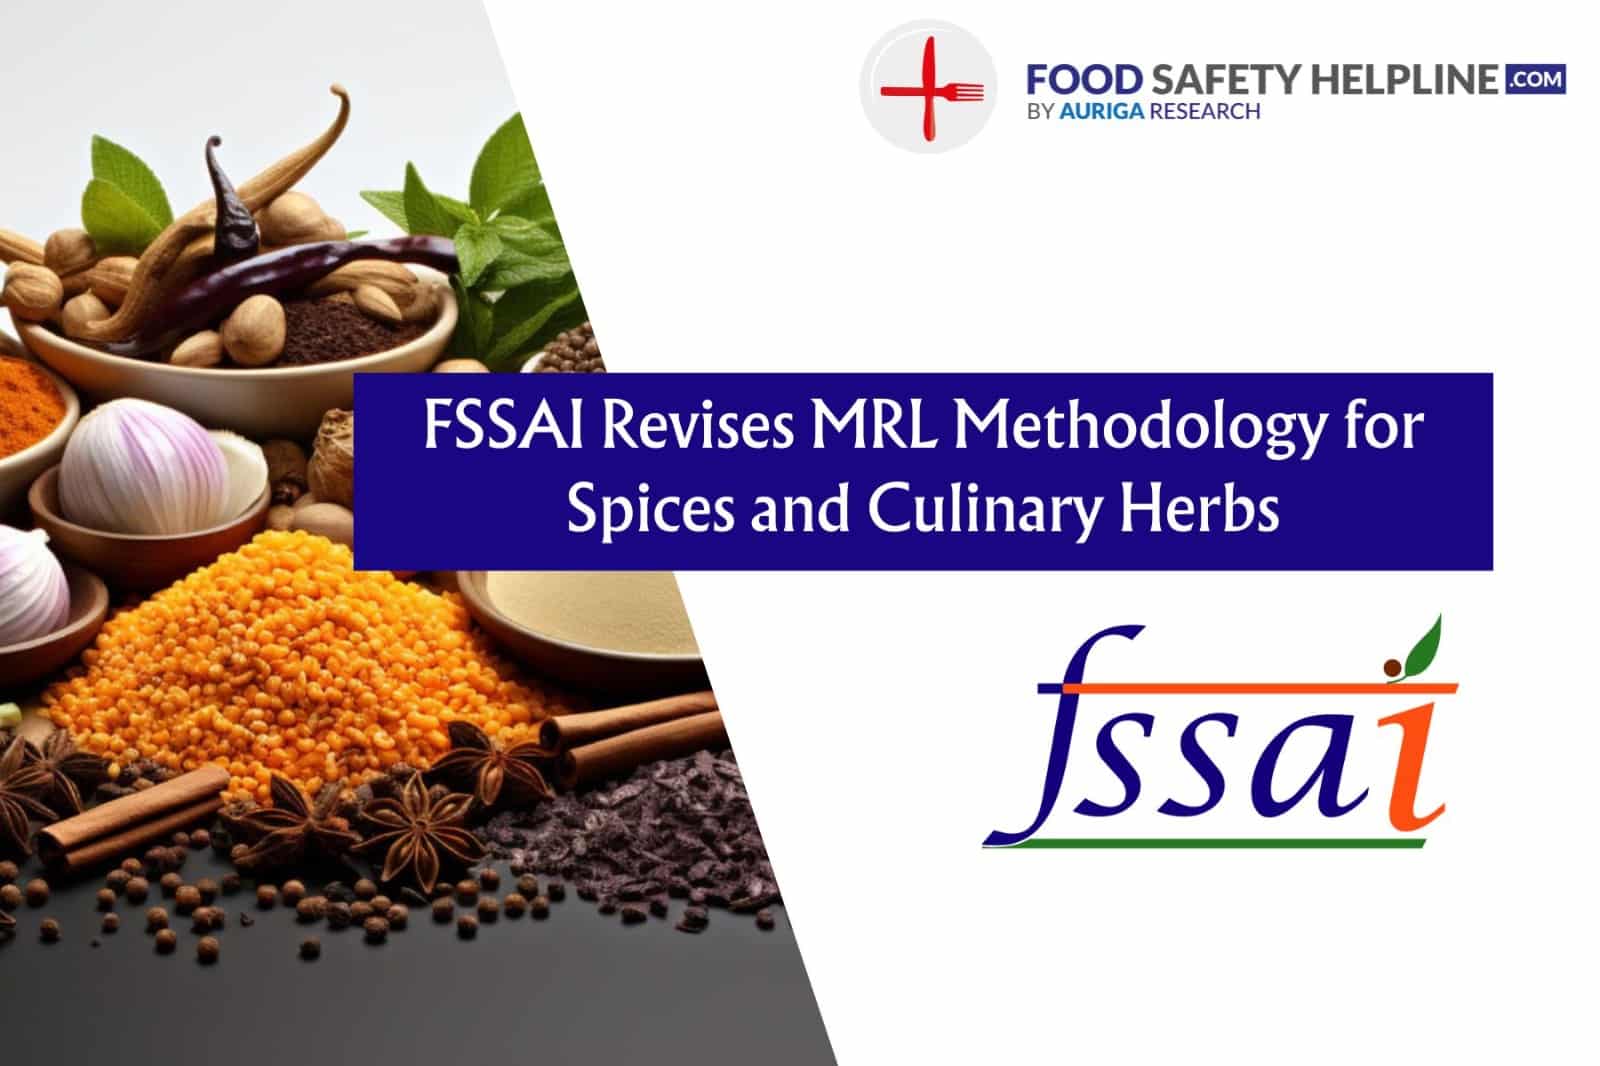 FSSAI Revises MRLs Methodology for Spices and Culinary Herbs